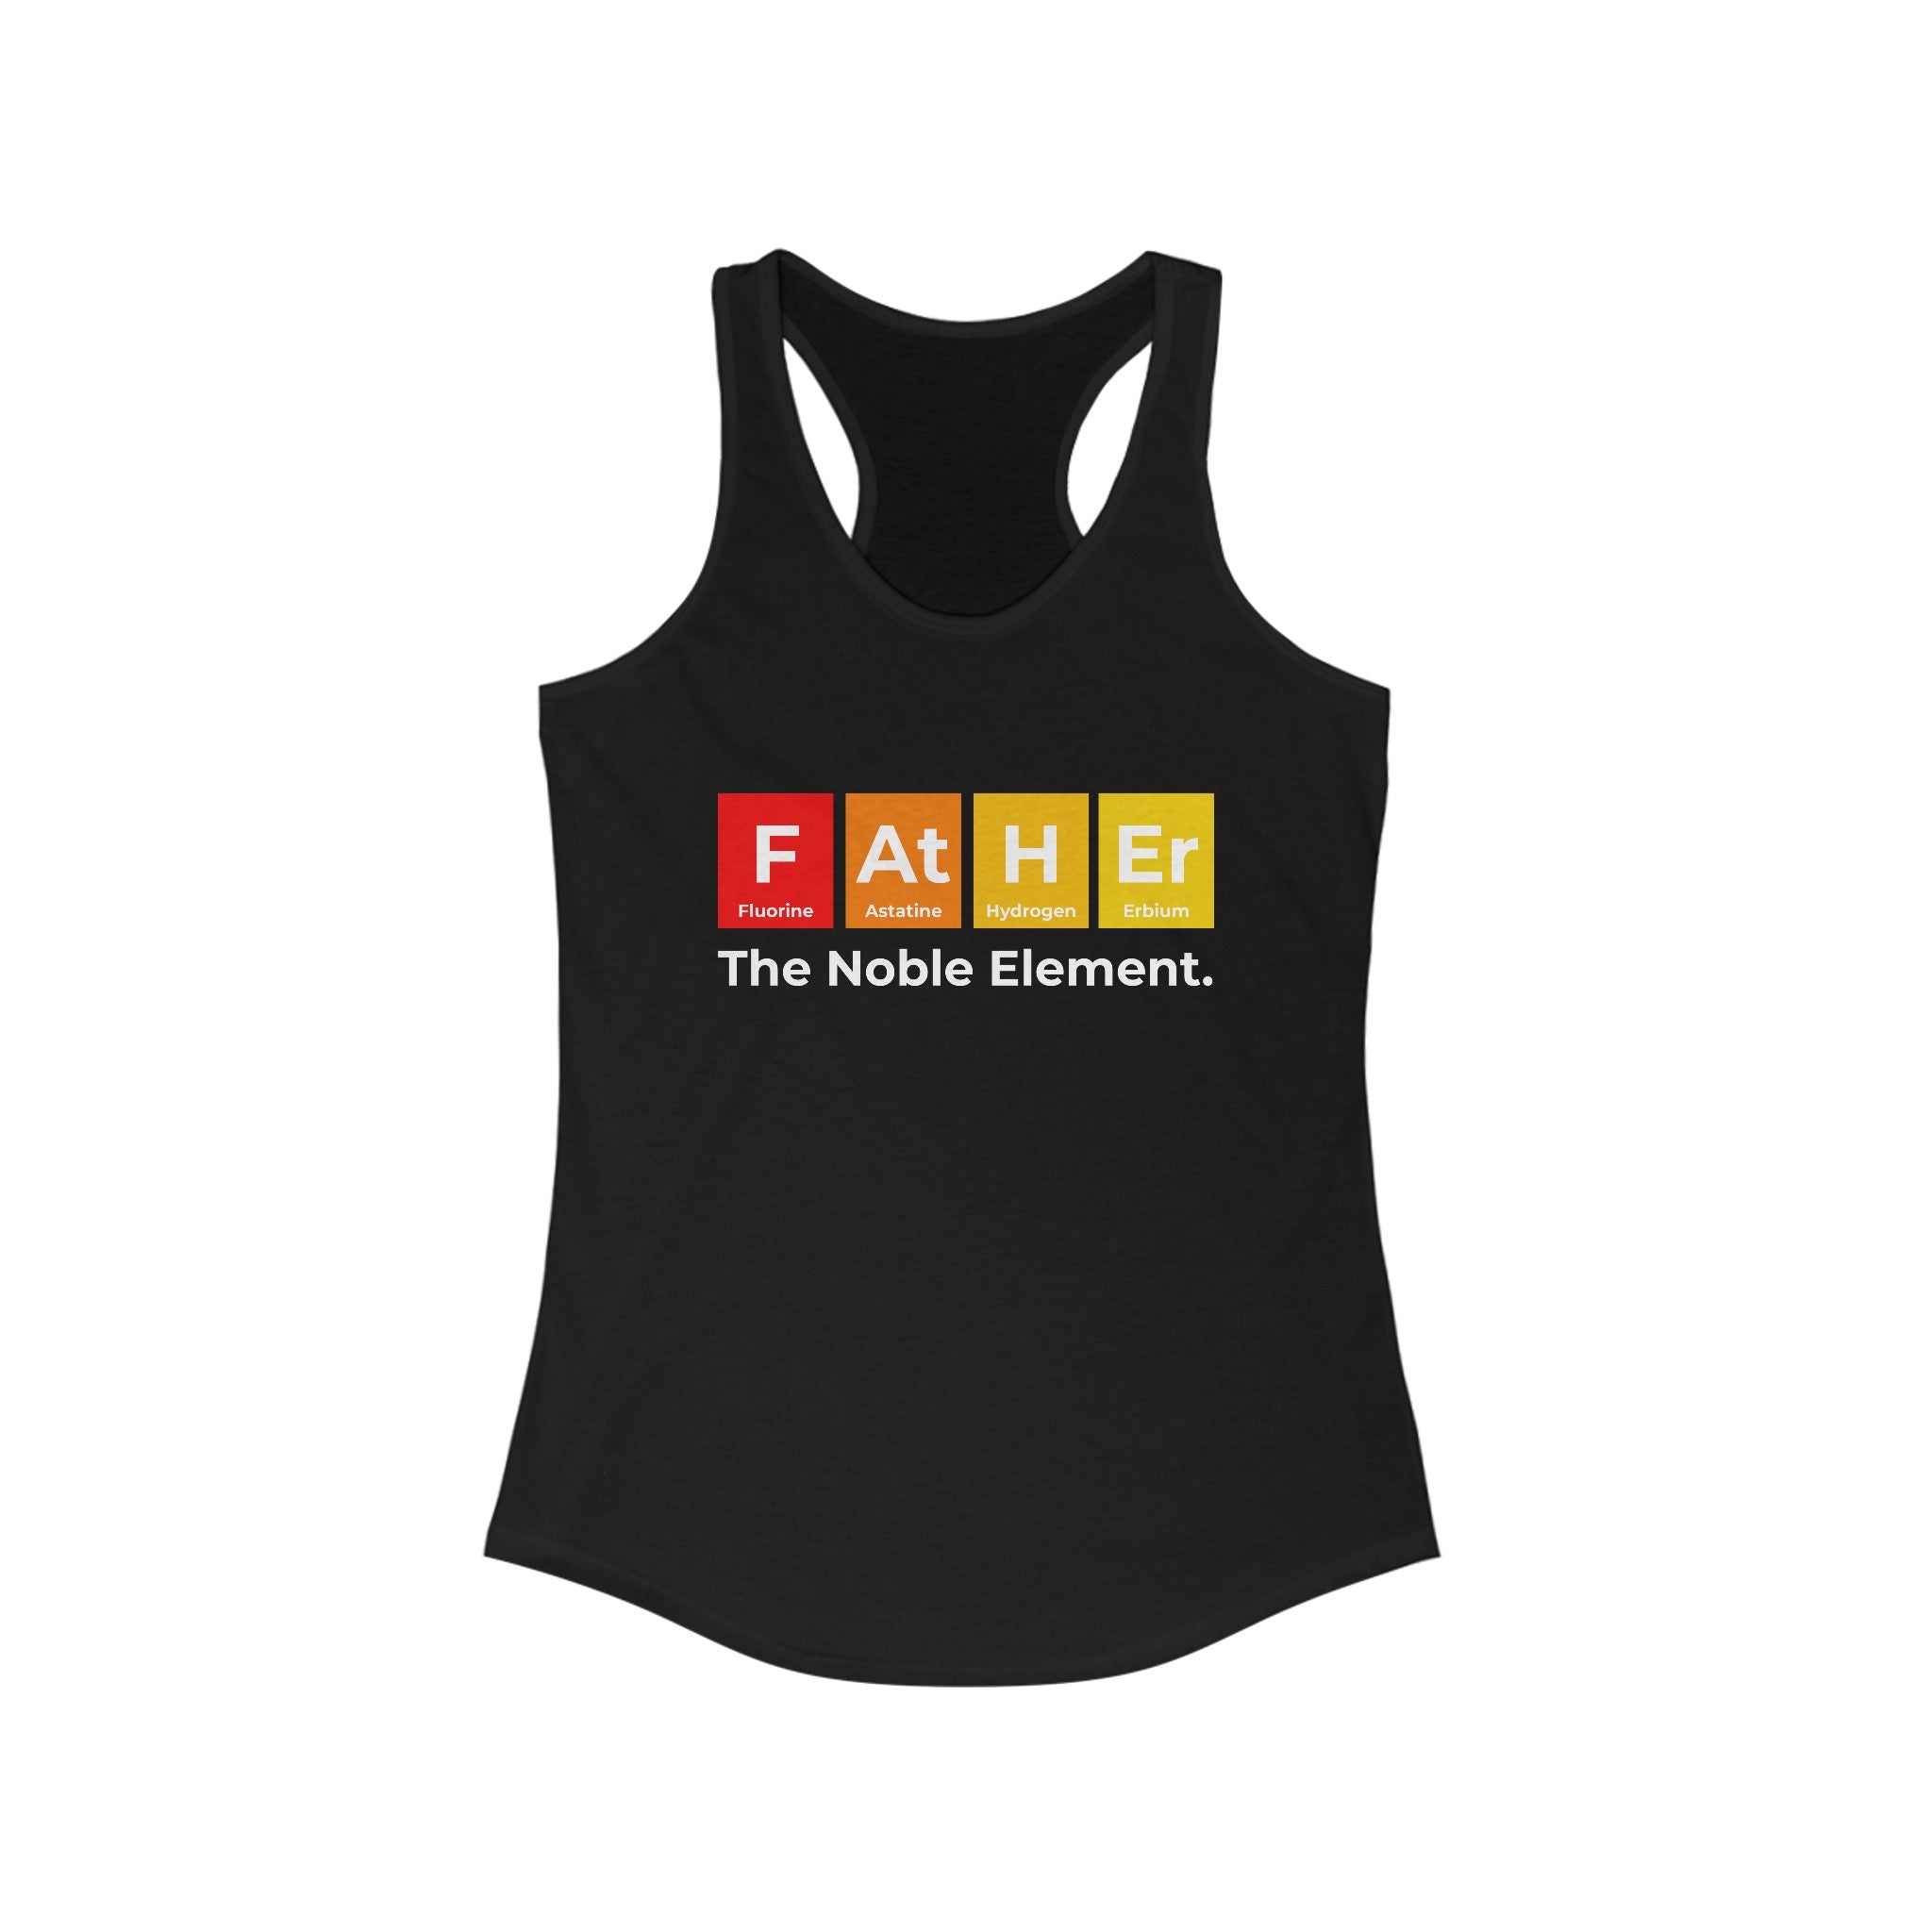 Black tank top with the word "Father" stylized using periodic table elements: Fluorine, Astatine, Hydrogen, and Erbium. Below, text reads "The Noble Element." This lightweight Father Graphic - Women's Racerback Tank features trendy Father graphic designs perfect for an active style.